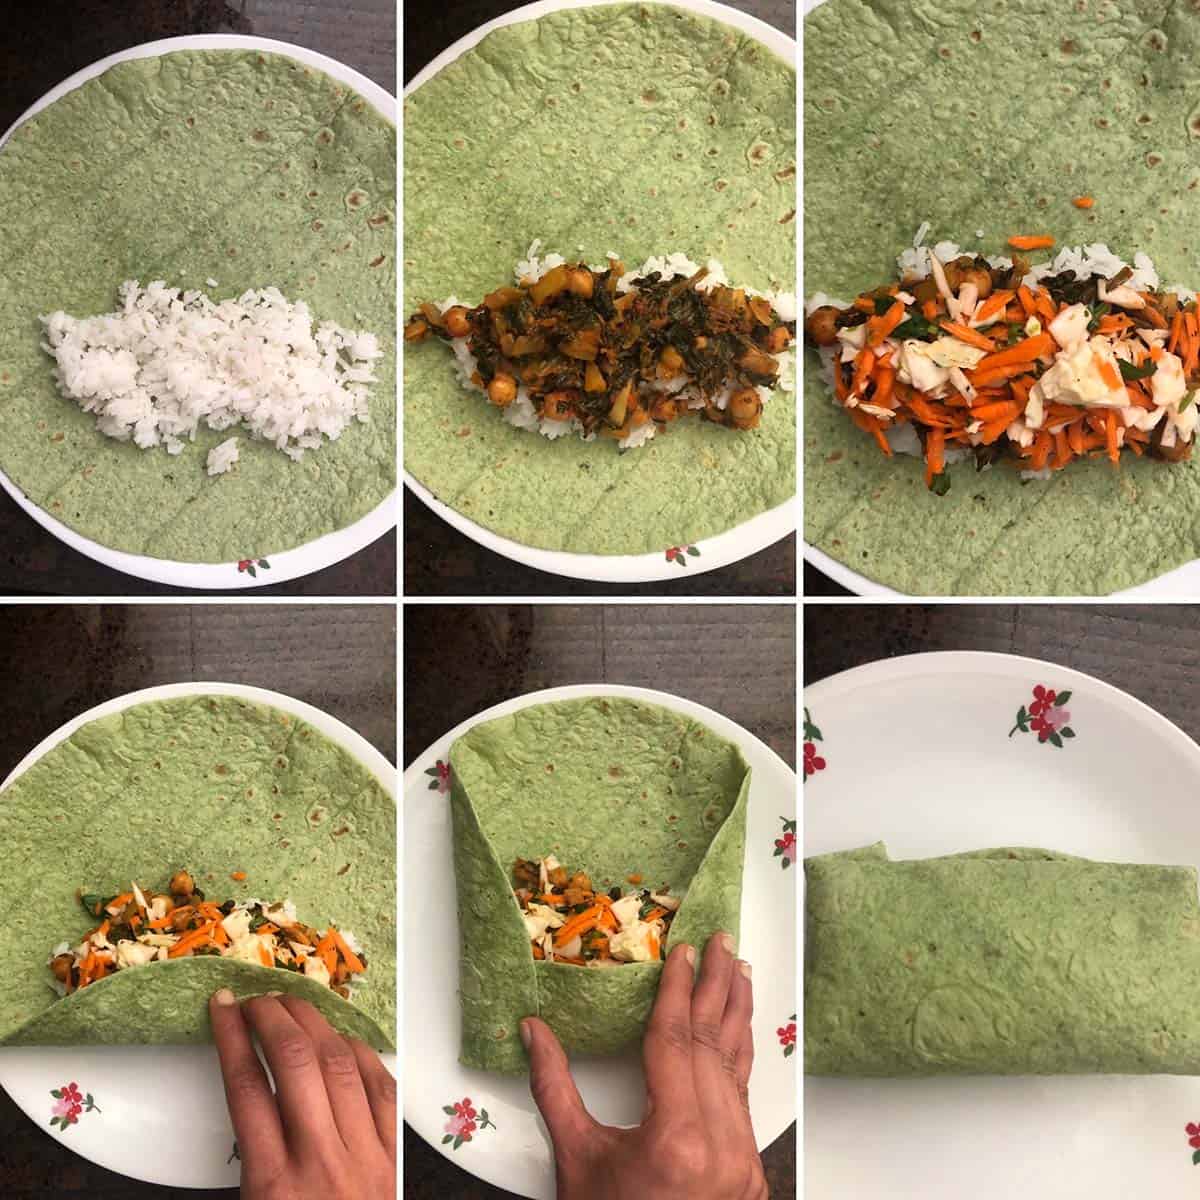 Step by step photos showing the making of wrap sandwich - place the fillings on the bottom half of the tortilla, fold the bottom edge over the filling, followed by the sides, then roll and wrap to make the sandwich